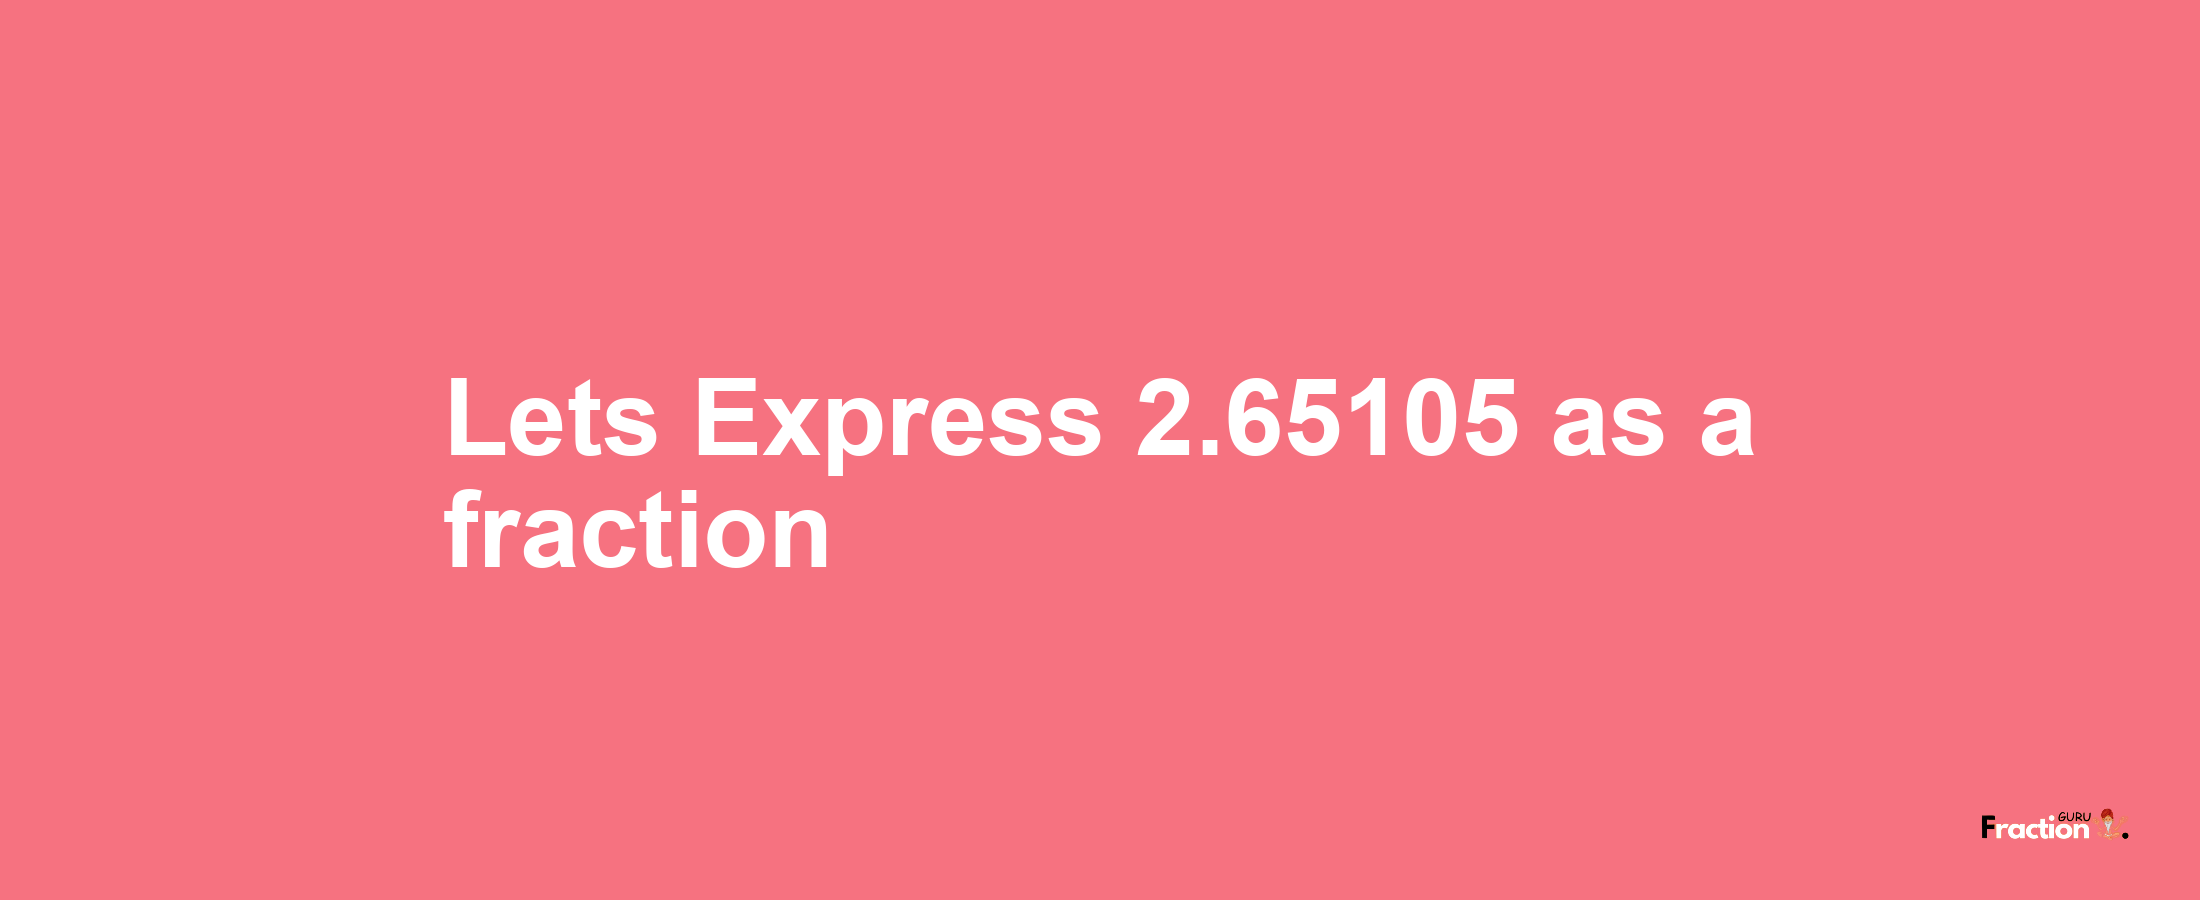 Lets Express 2.65105 as afraction